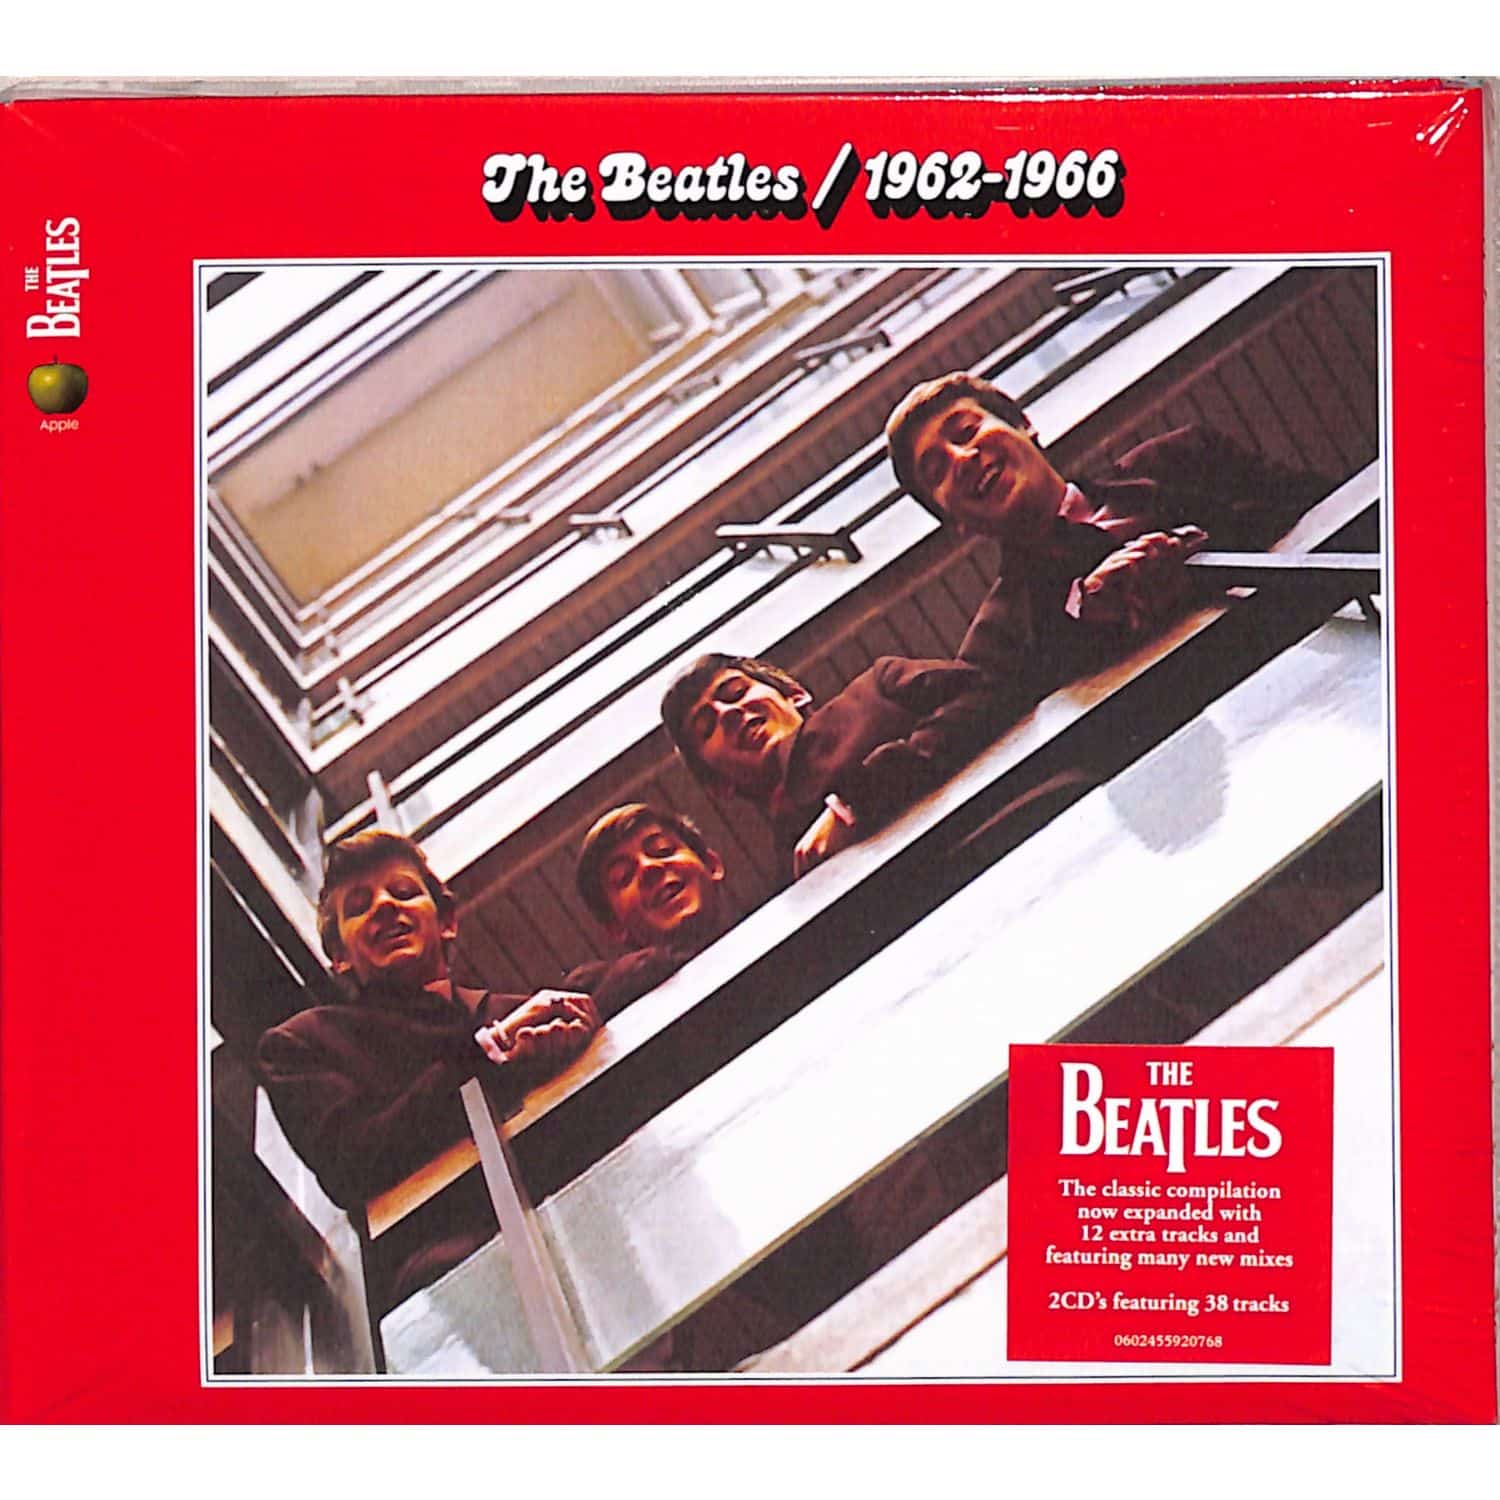 The Beatles - THE BEATLES 1962 - 1966 